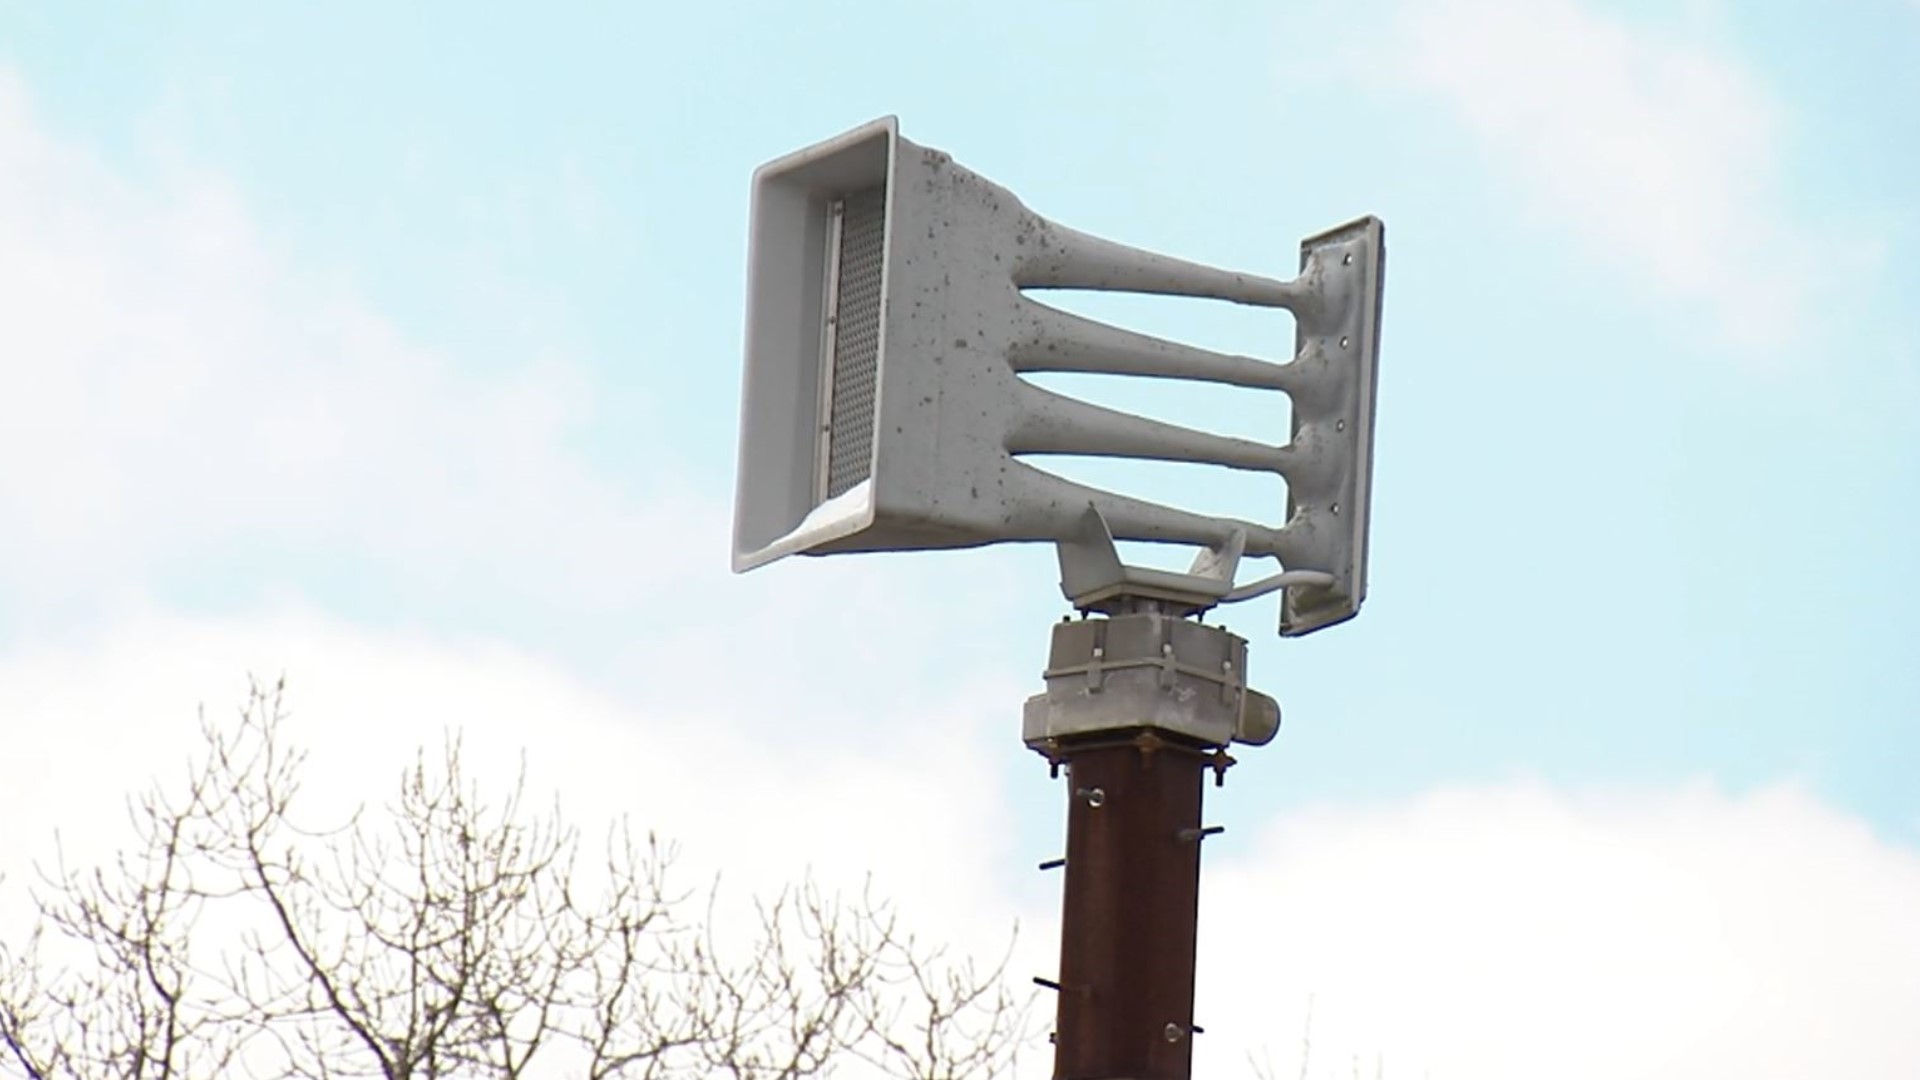 Tornado sirens across the state will be activated Wednesday morning as part of a yearly drill held during Ohio's Spring Severe Weather Awareness Week.